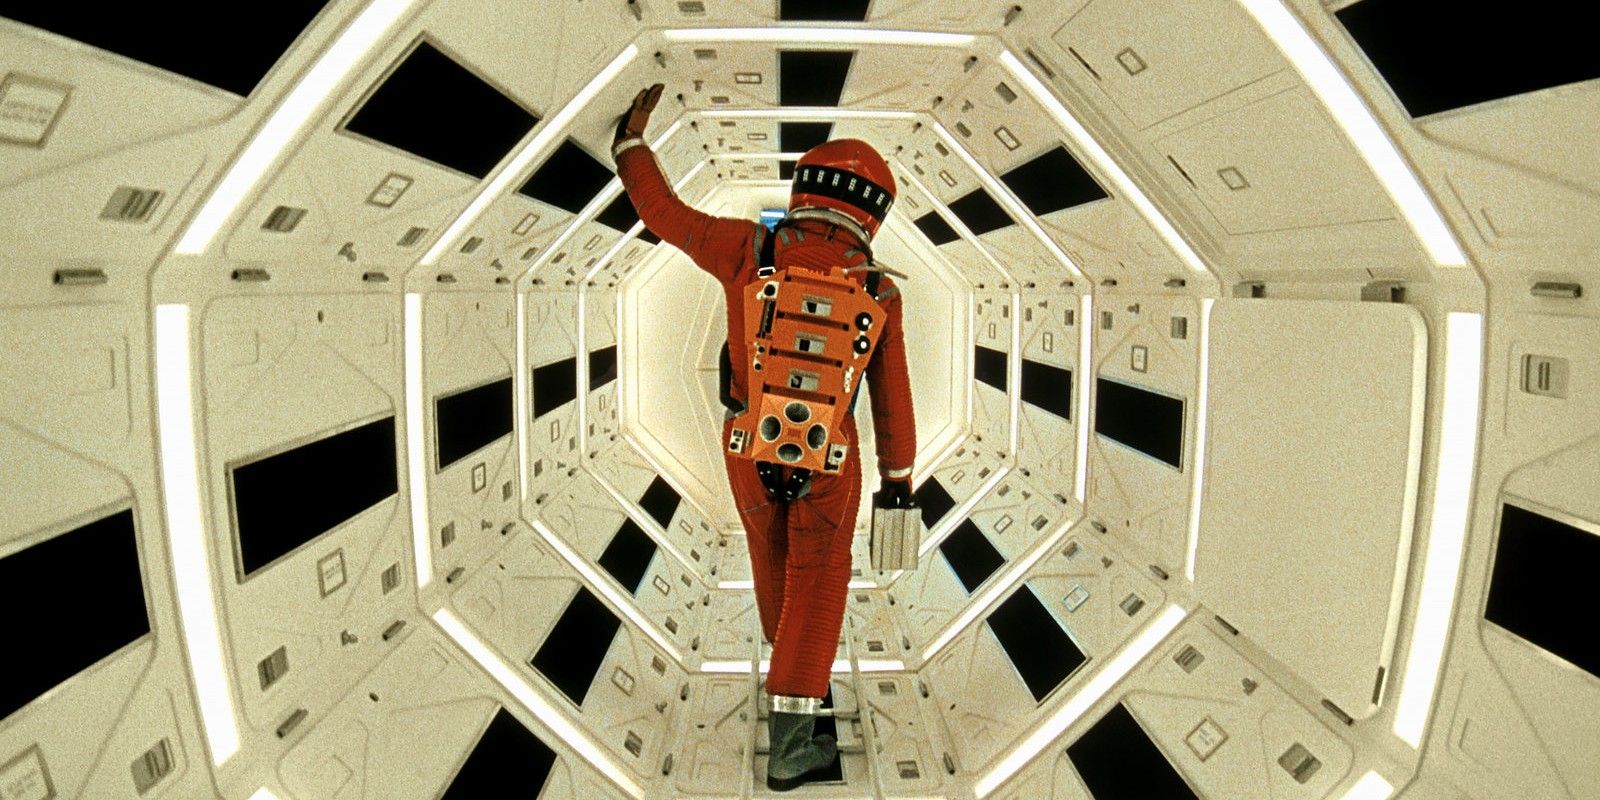 Astronaut from 2001: A Space Odyssey.